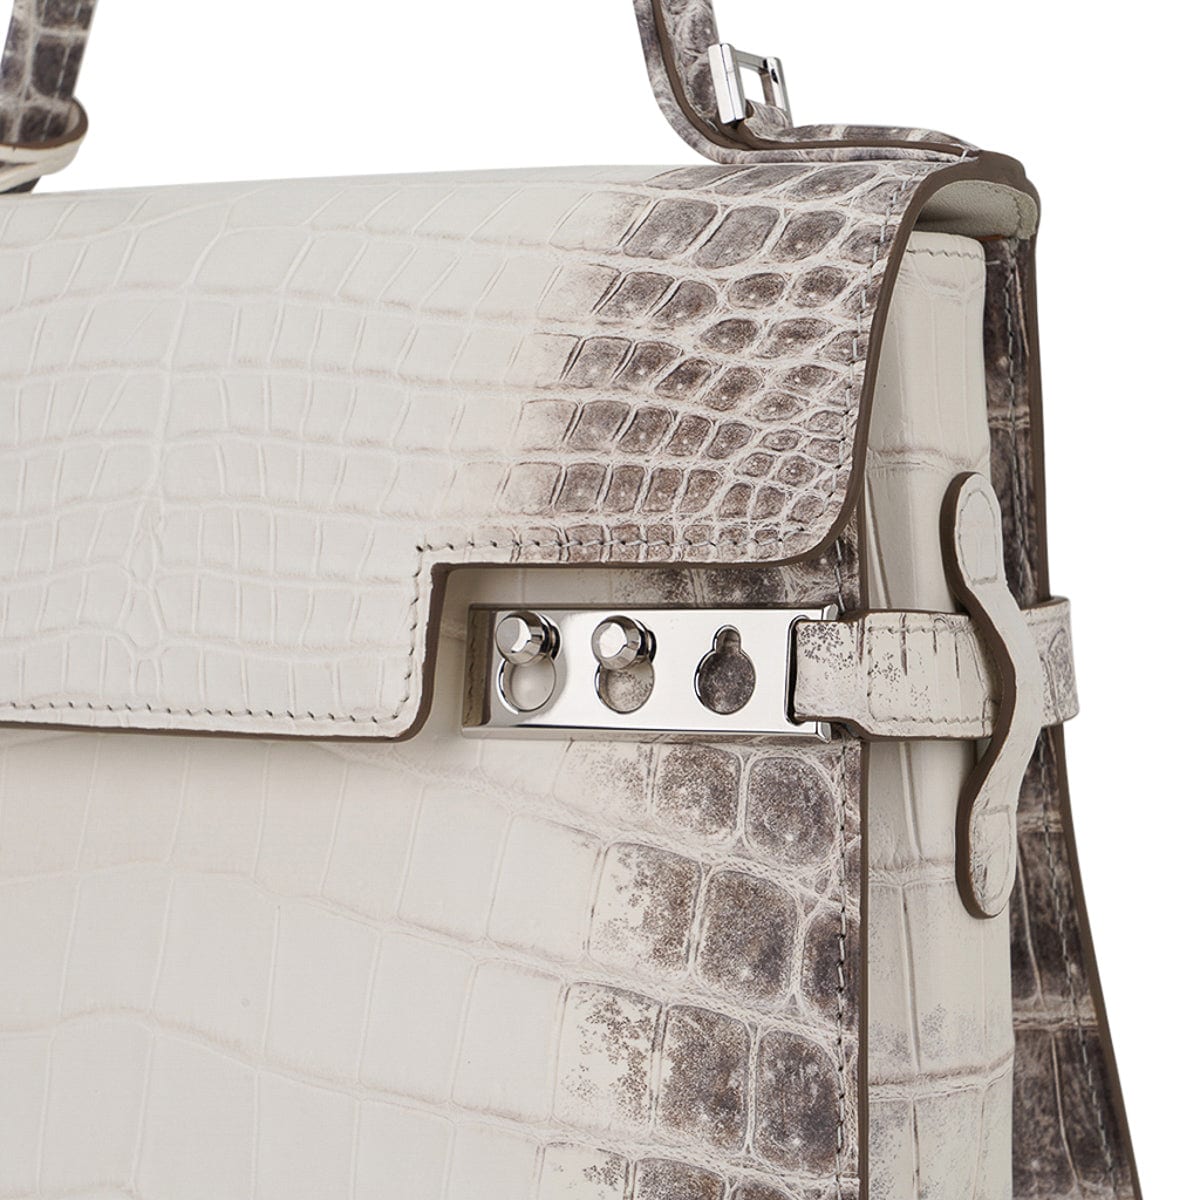 Delvaux - At Delvaux, the details are everything and it